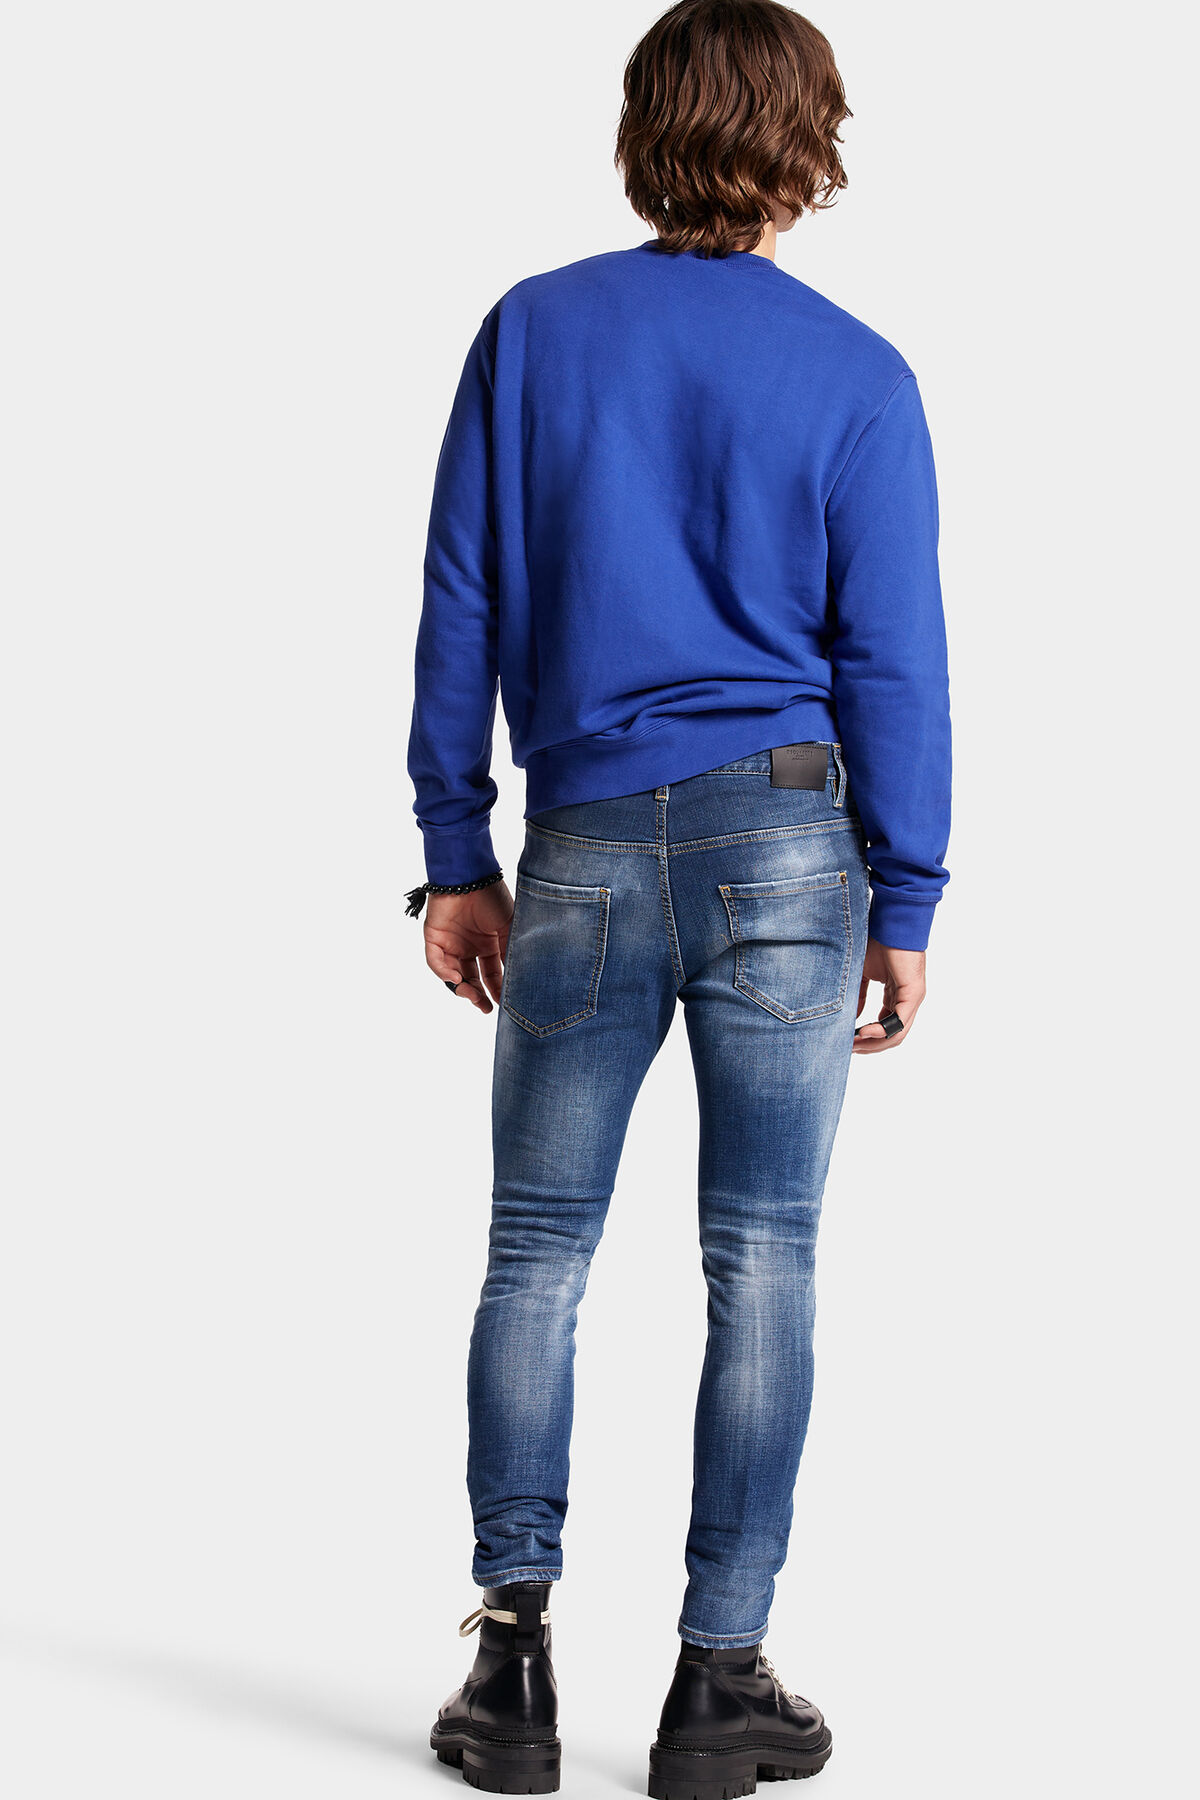 DSQUARED2 Jeans Skater in Washed Blue 56